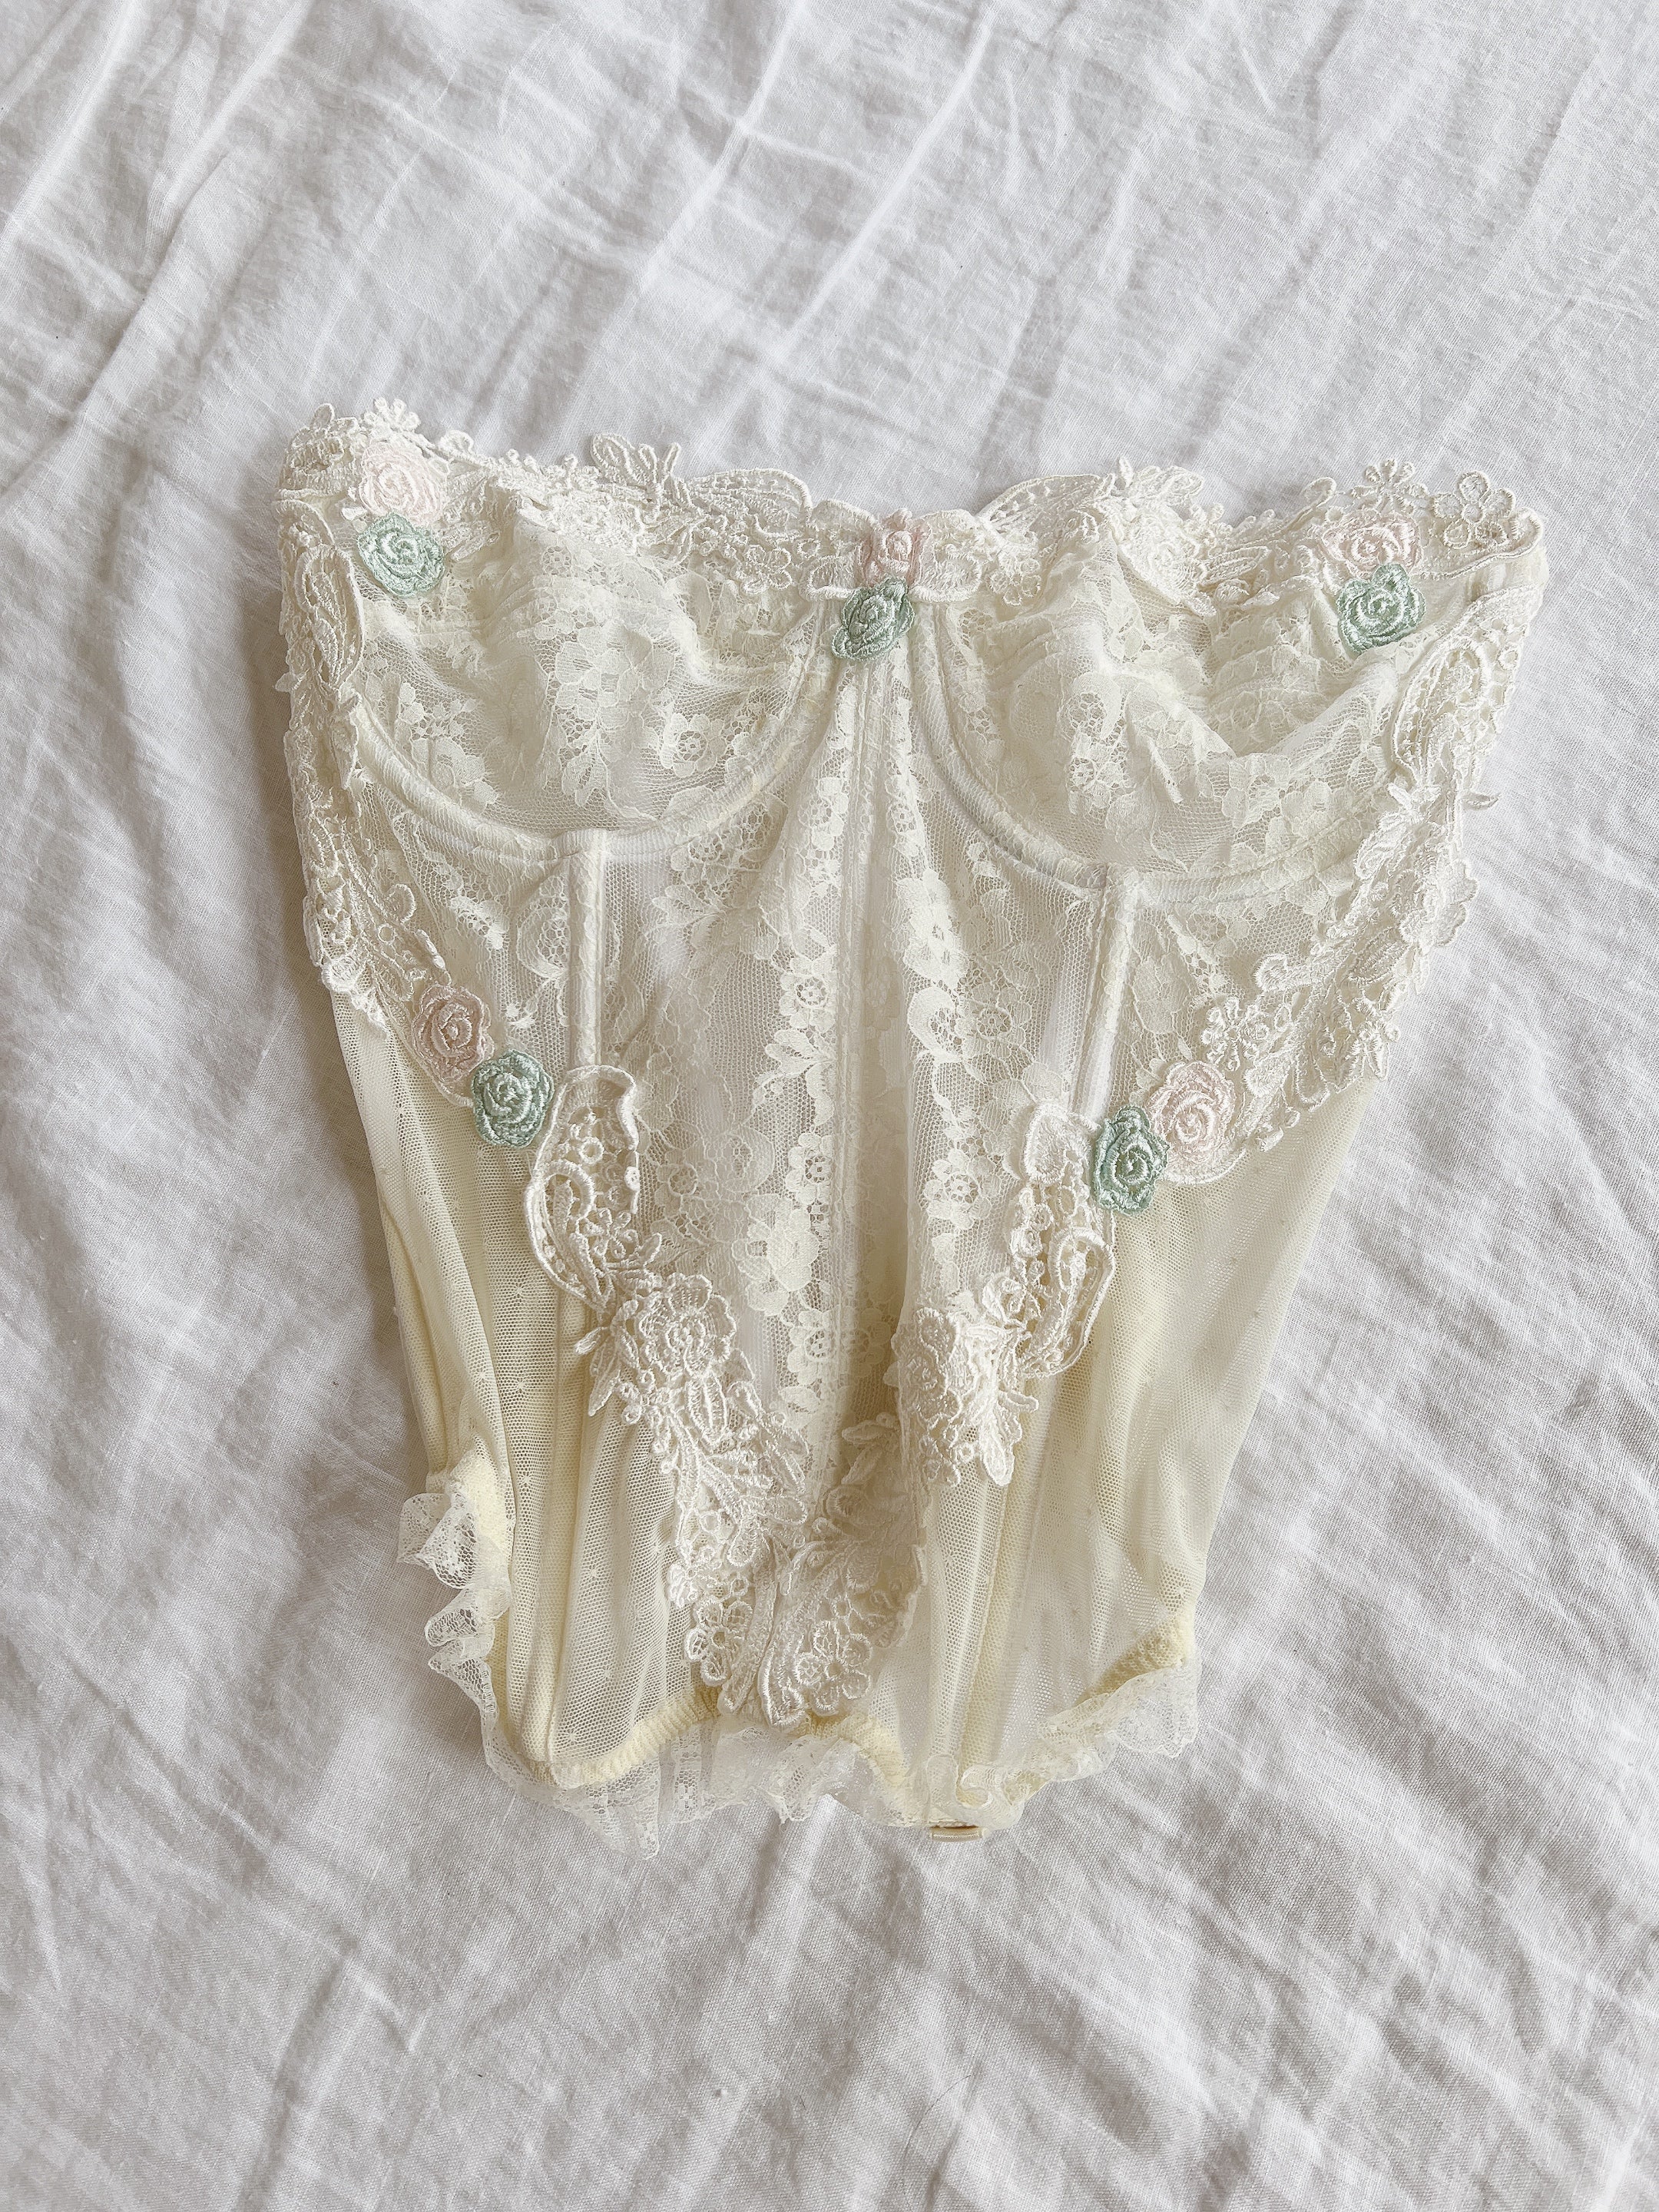 RARE Vintage VS Embroidered Bustier - 32B/XS